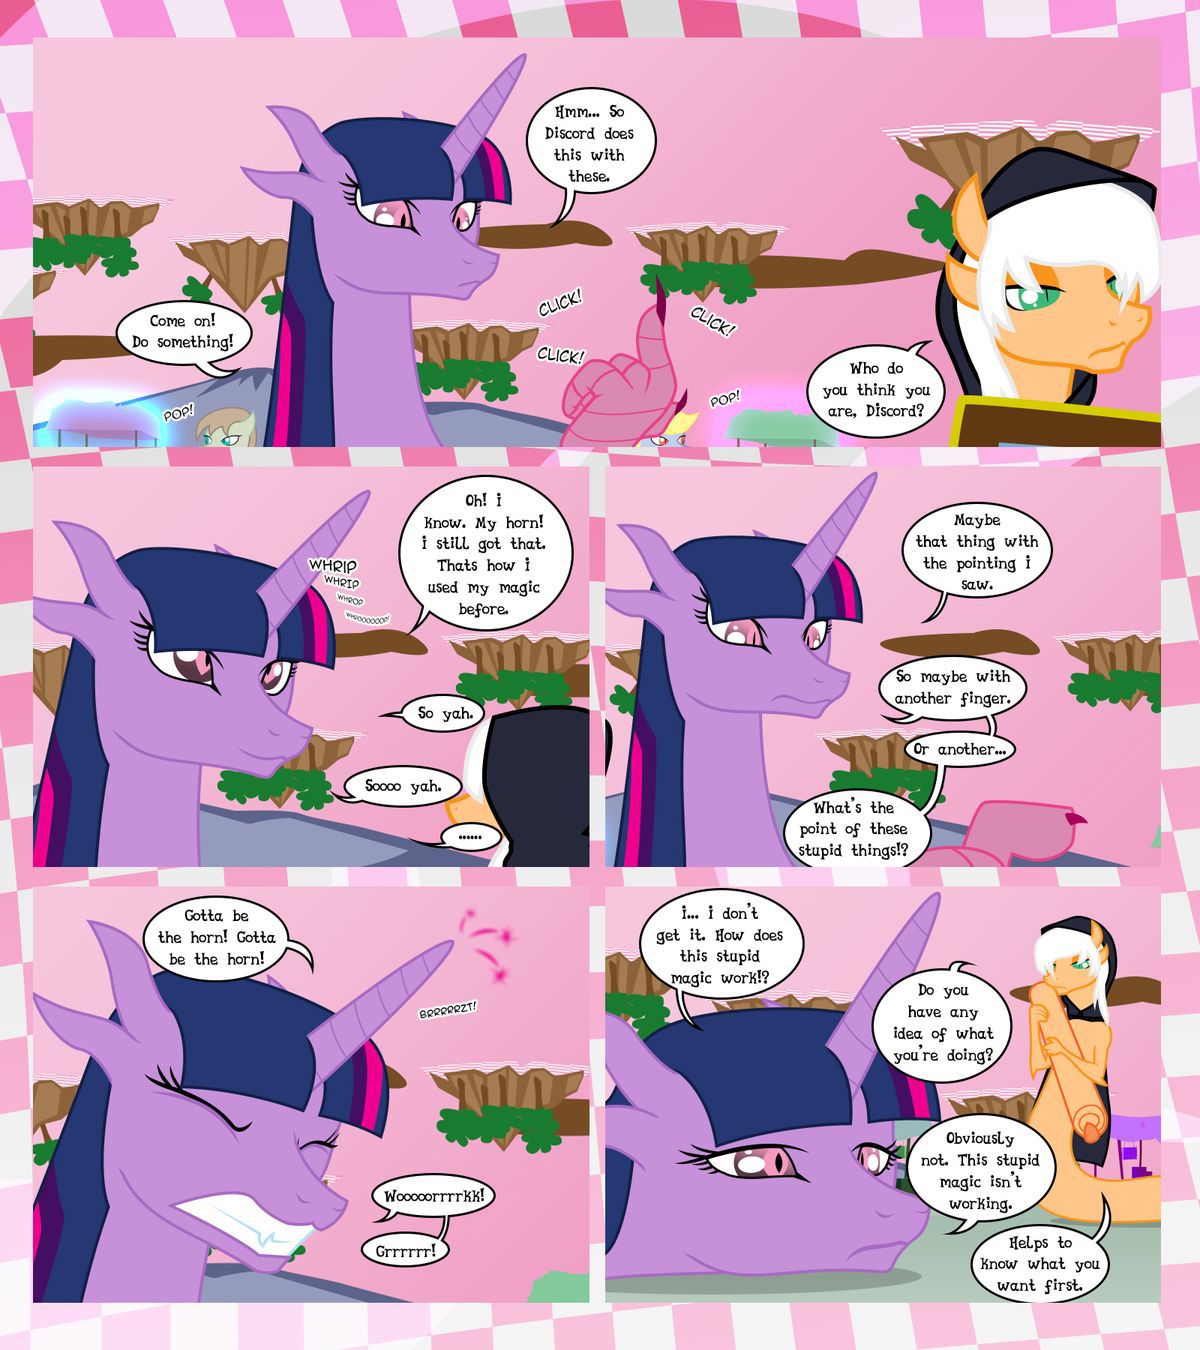 [GatesMcCloud] Cutie Mark Crusaders 10k: Chapter 3 - The Lost (My Little Pony: Friendship is Magic) [English] [Ongoing] 36